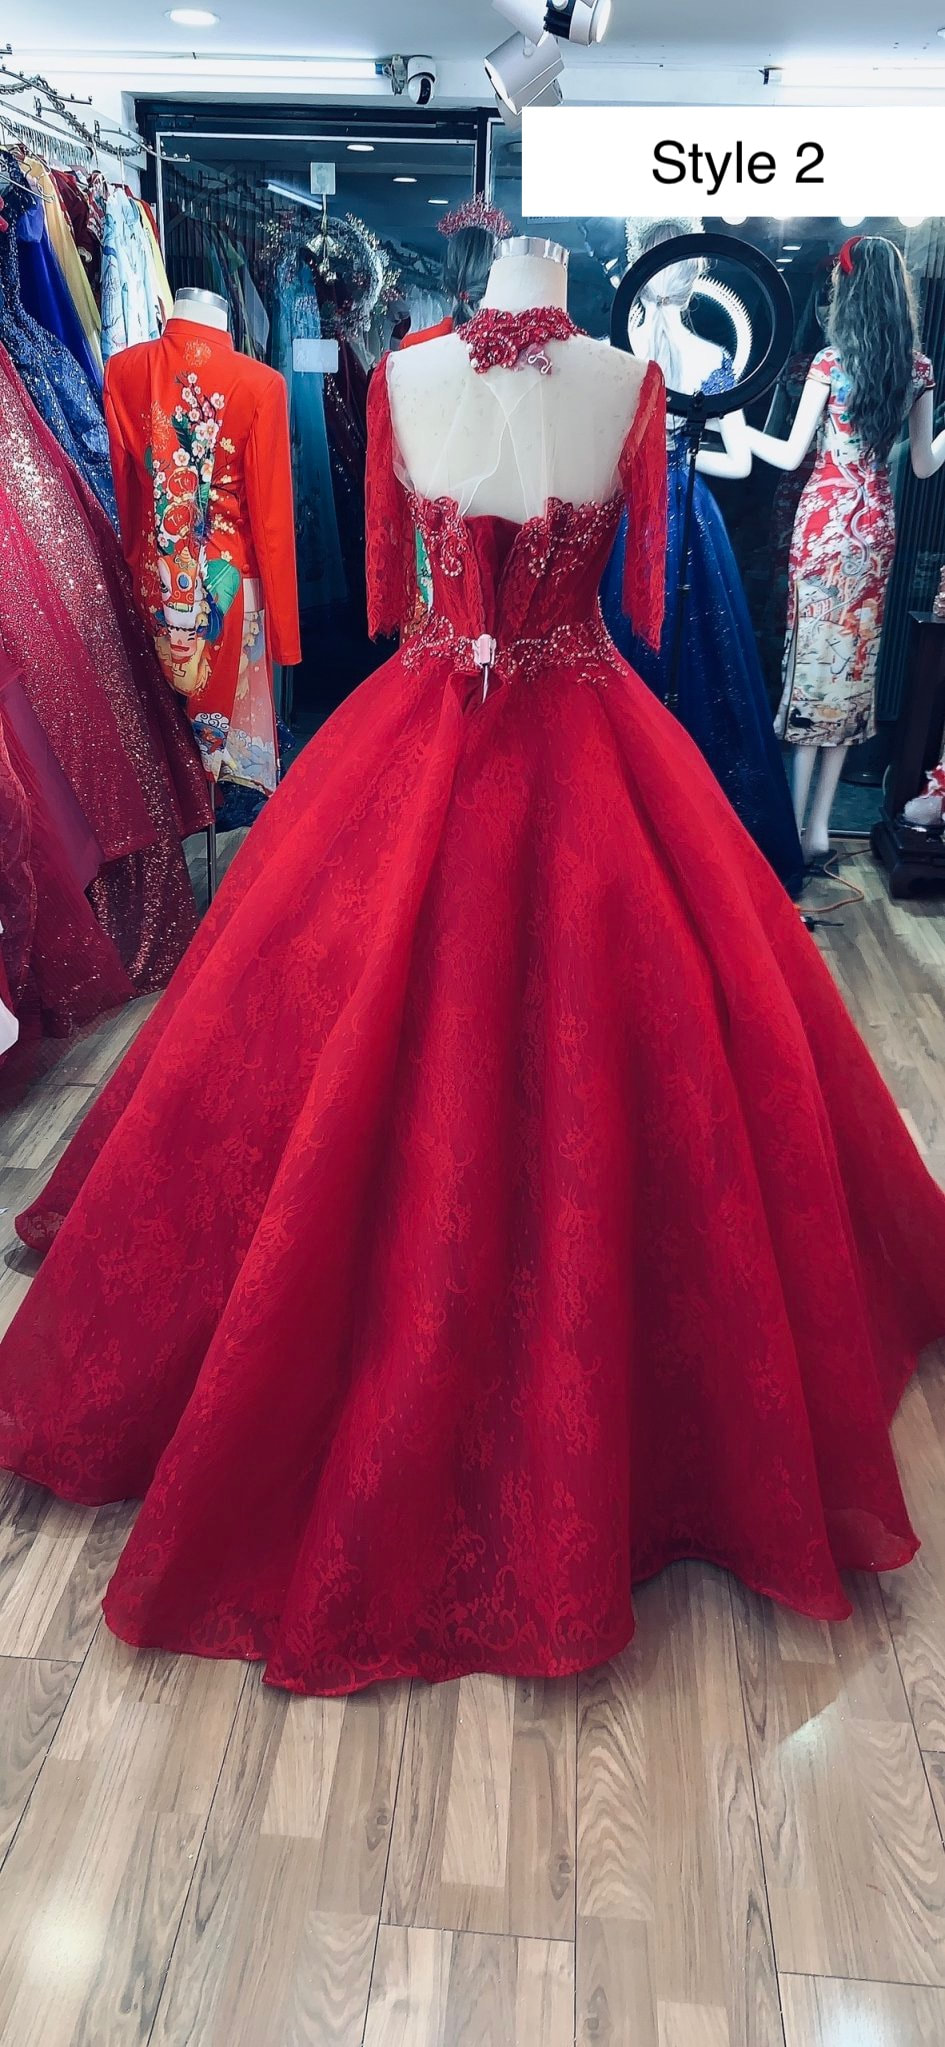 2019 New Red Lace Bridal Gowns Mermaid Lace Wedding Dress Wedding Dresses |  Wish